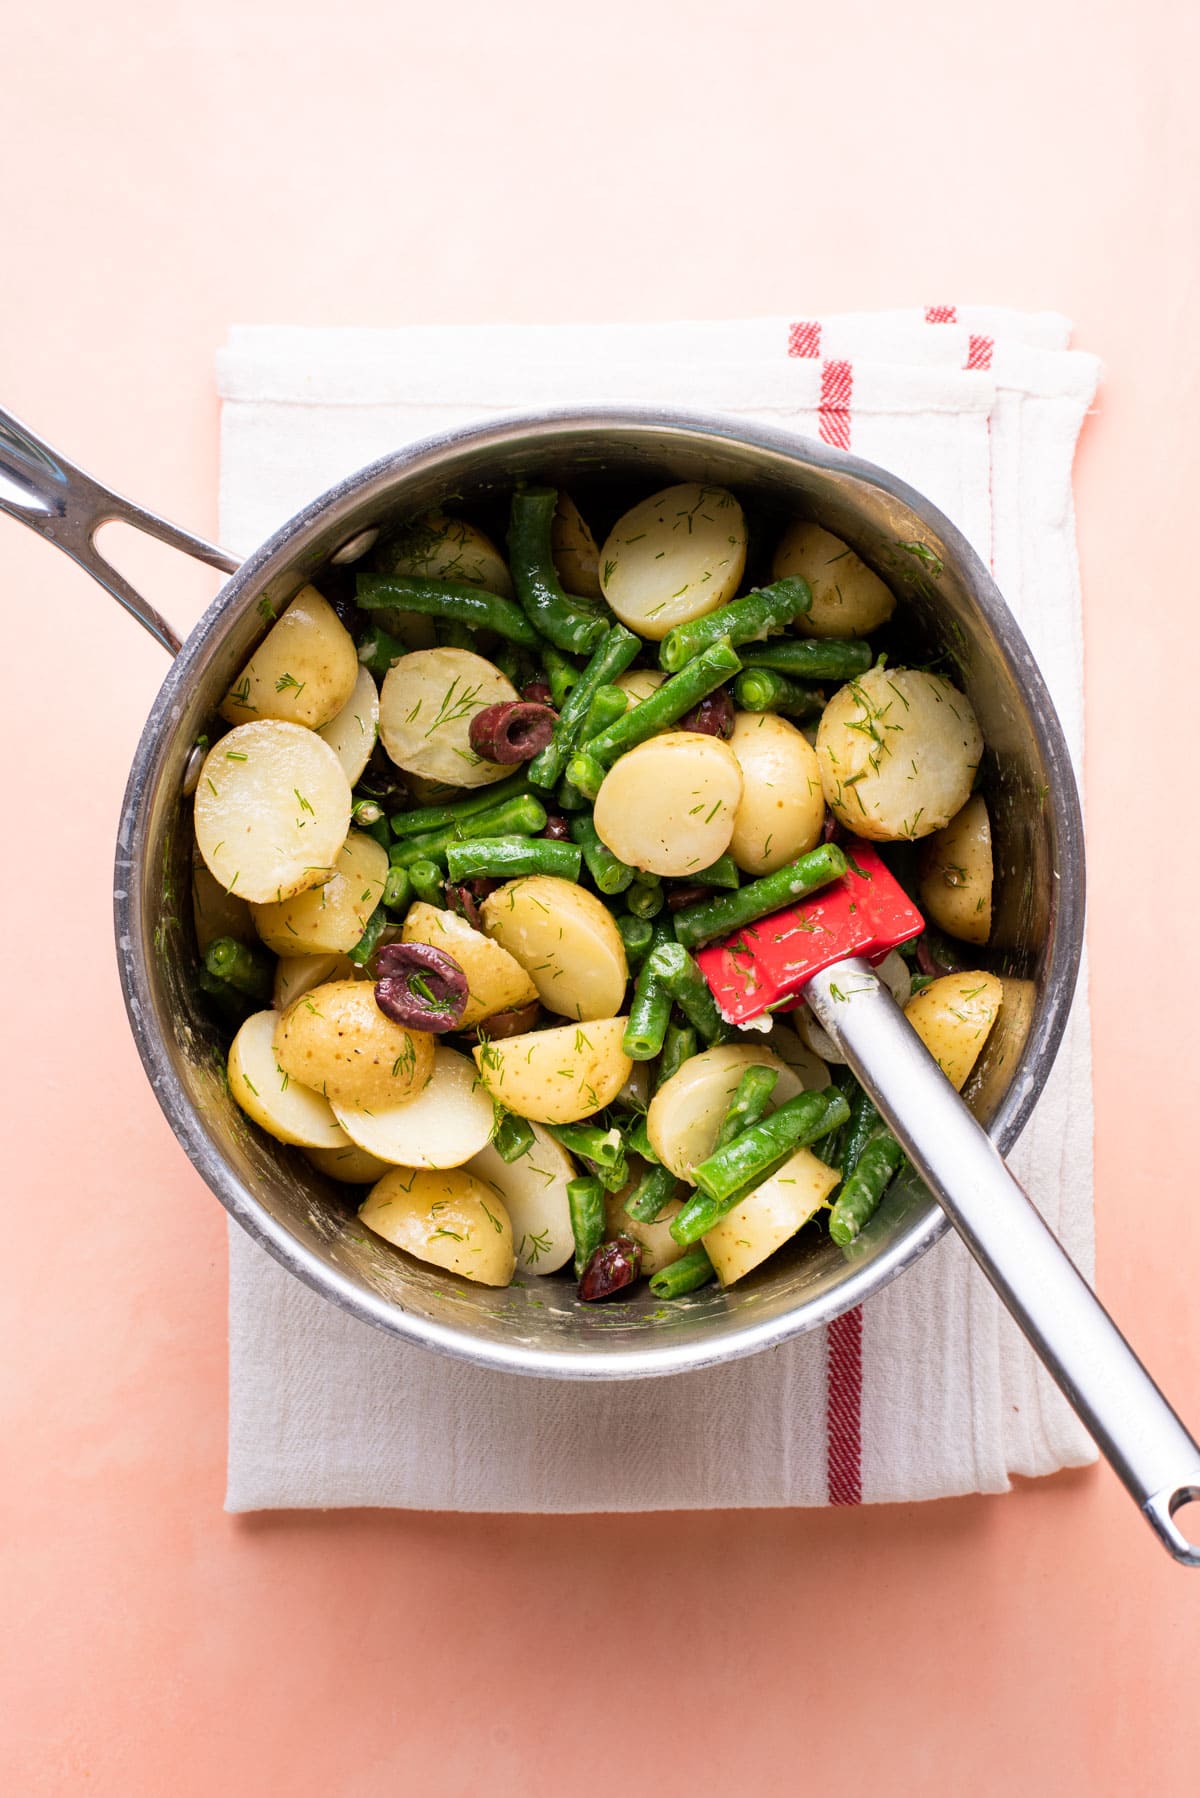 No-mayo potato salad with green beans and olives, mixed together in a pot.